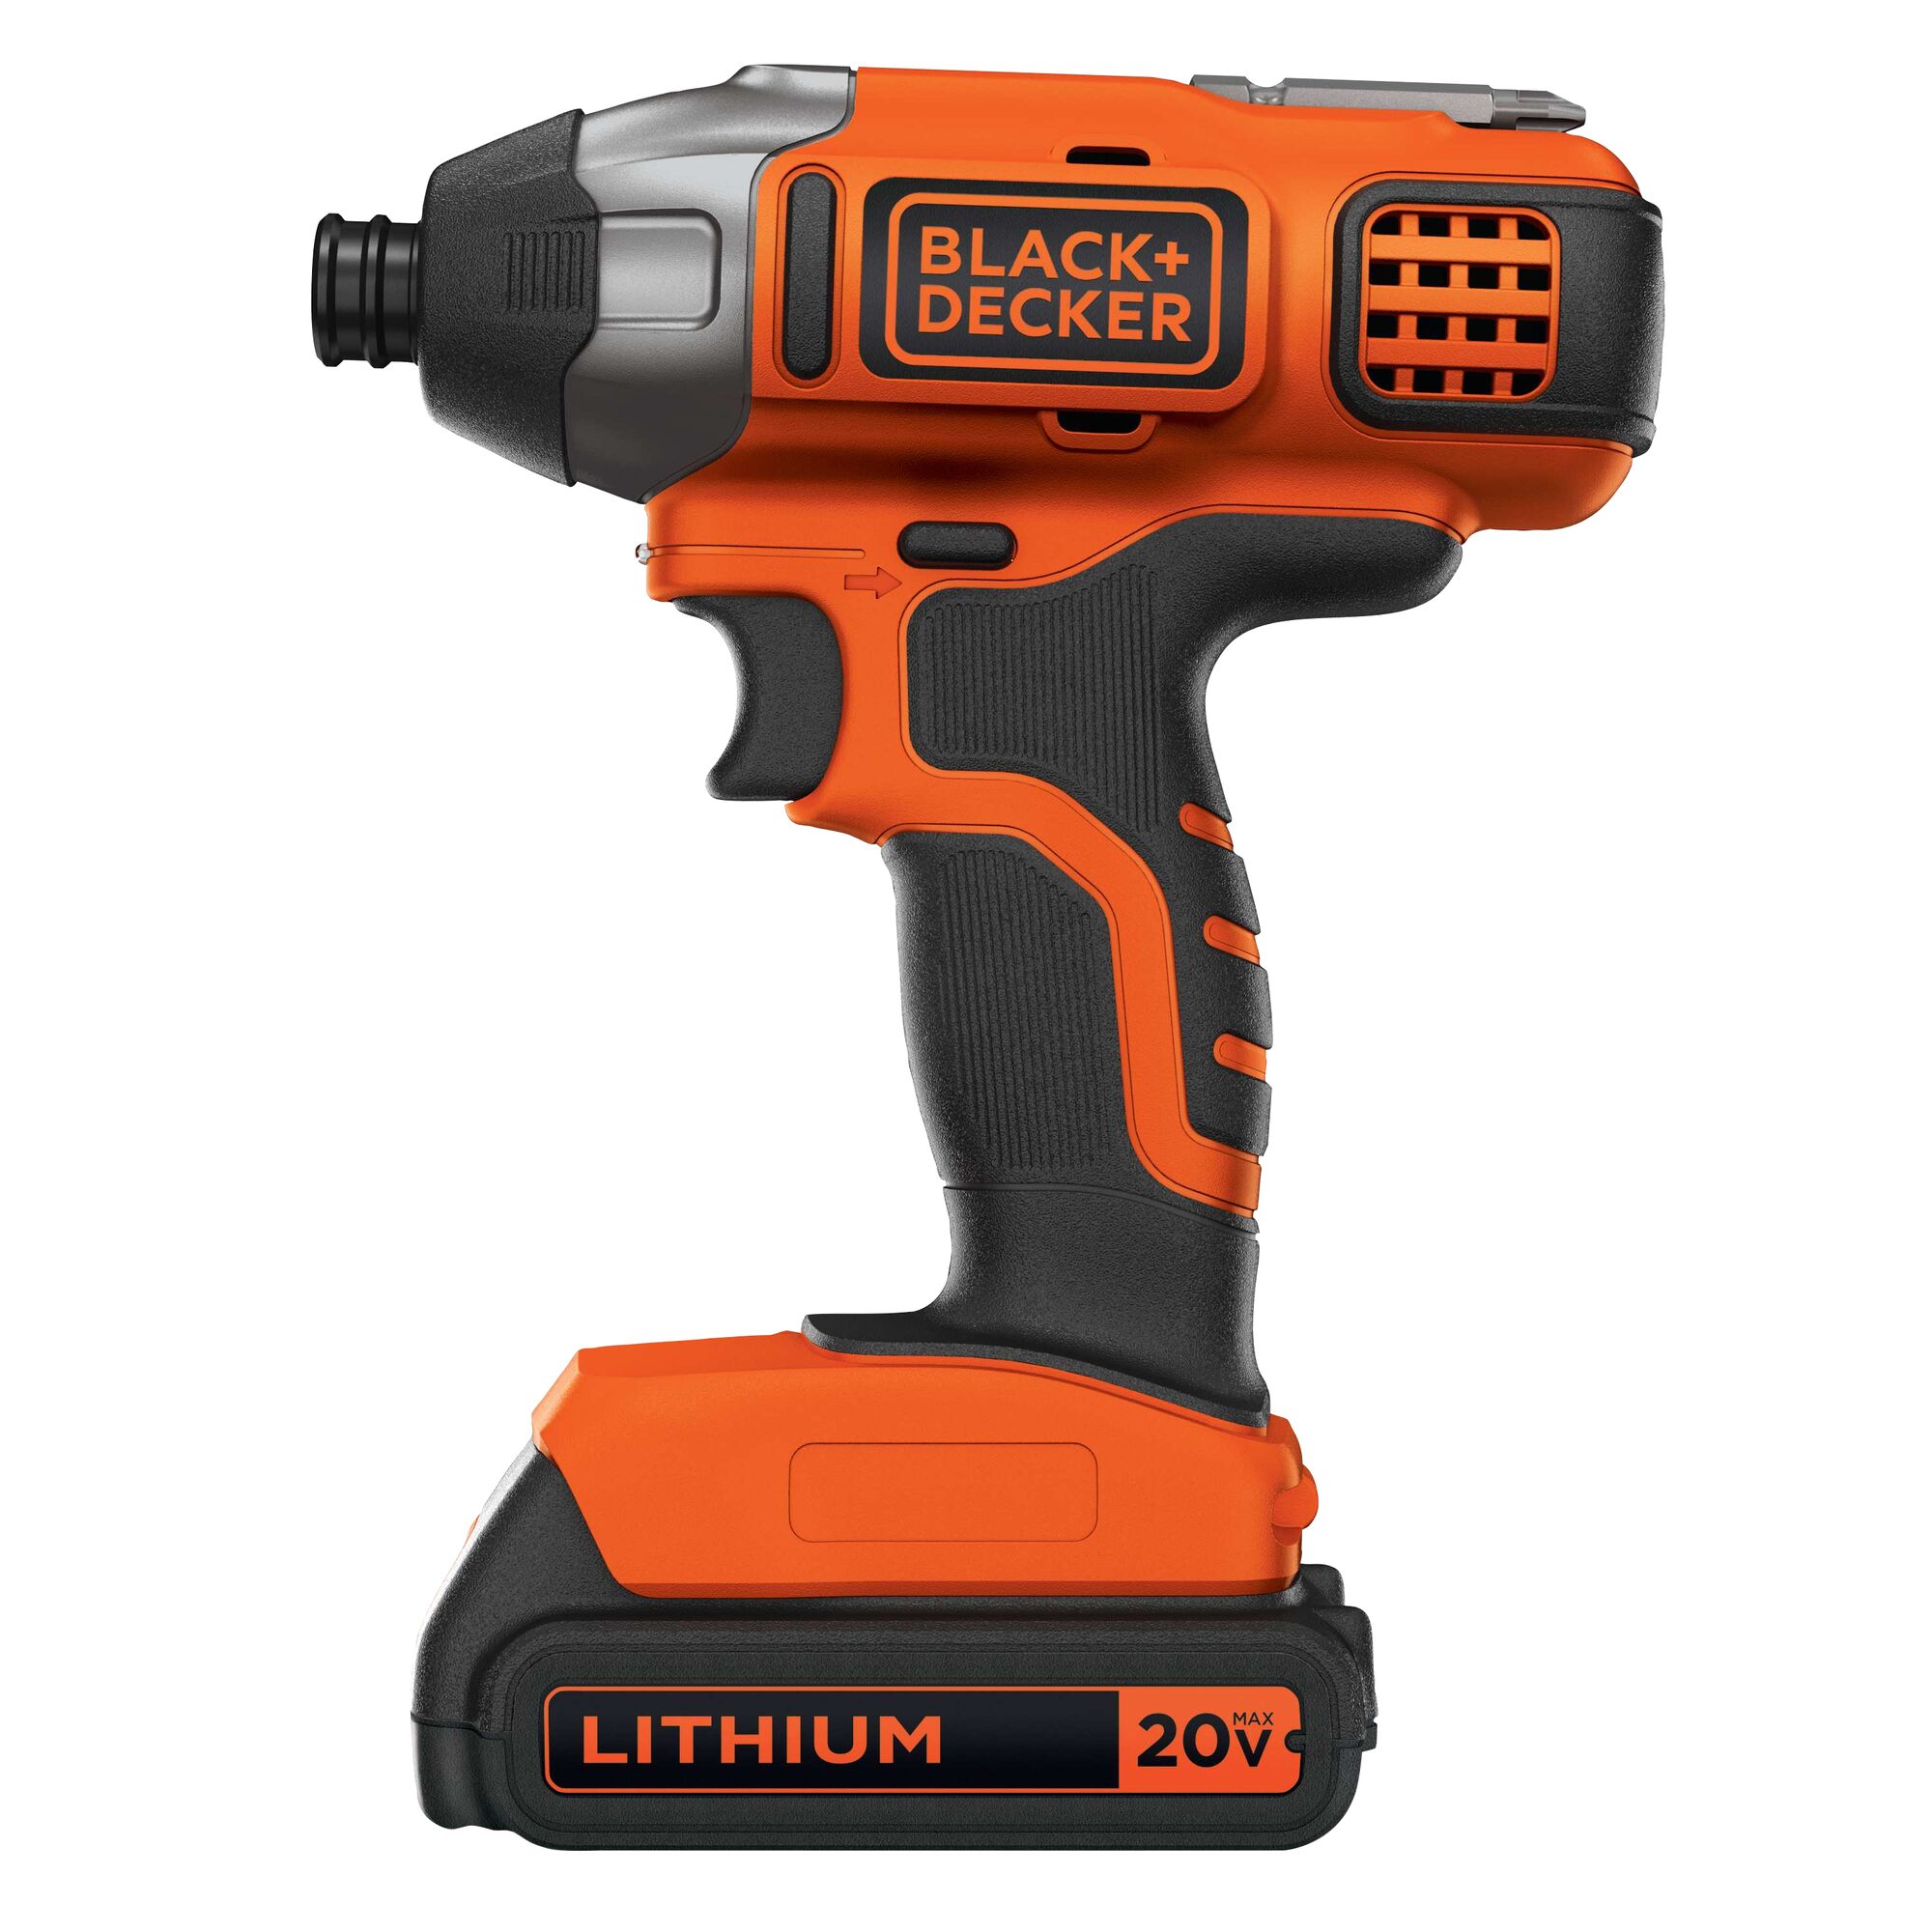 Profile of Lithium Impact Driver with Battery.